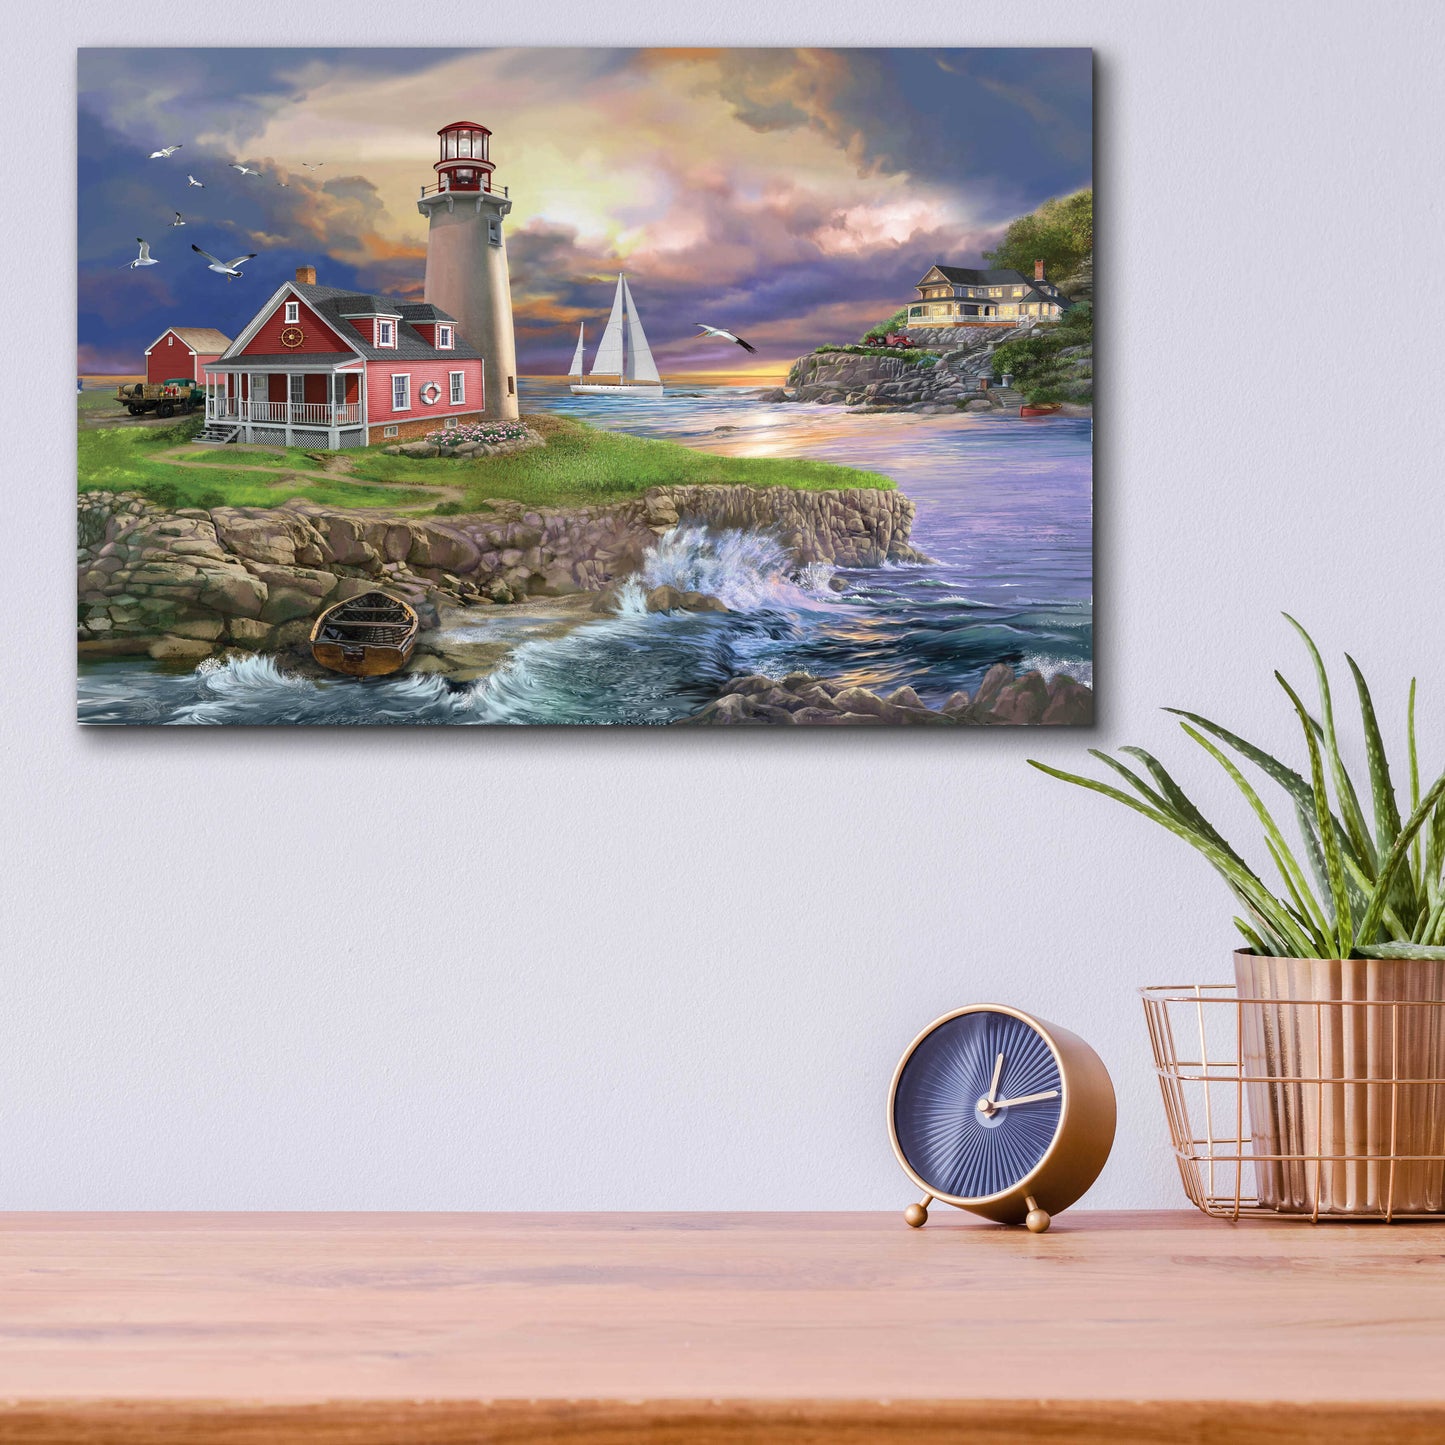 Epic Art 'Sunset Point Lighthouse' by Bigelow Illustrations, Acrylic Glass Wall Art,16x12